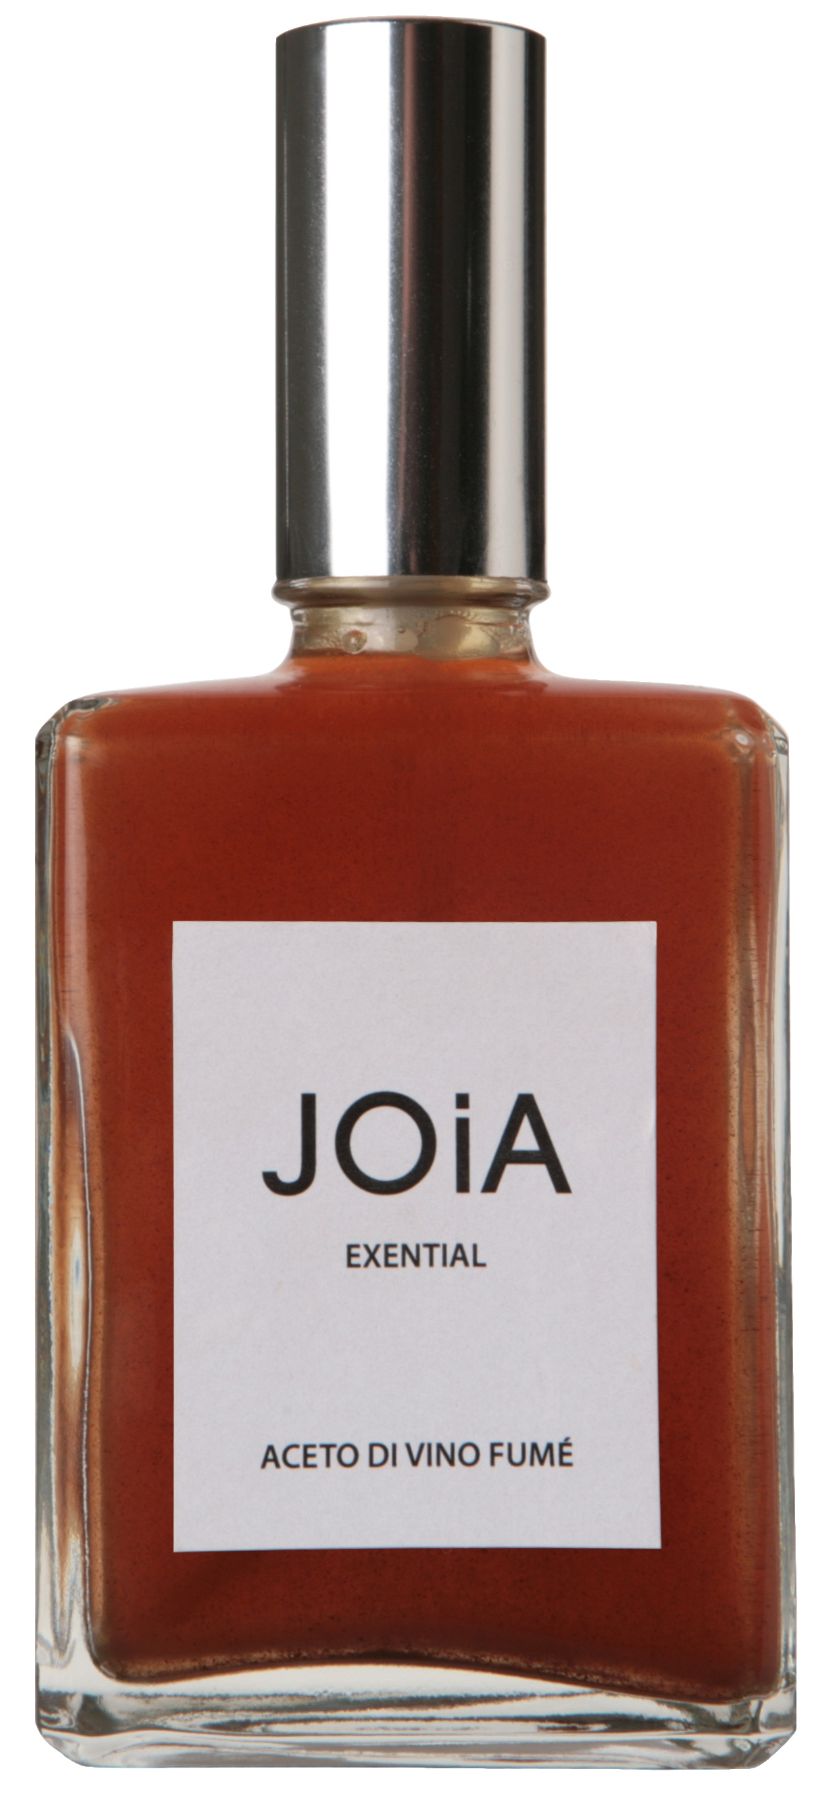 JoiA Exential